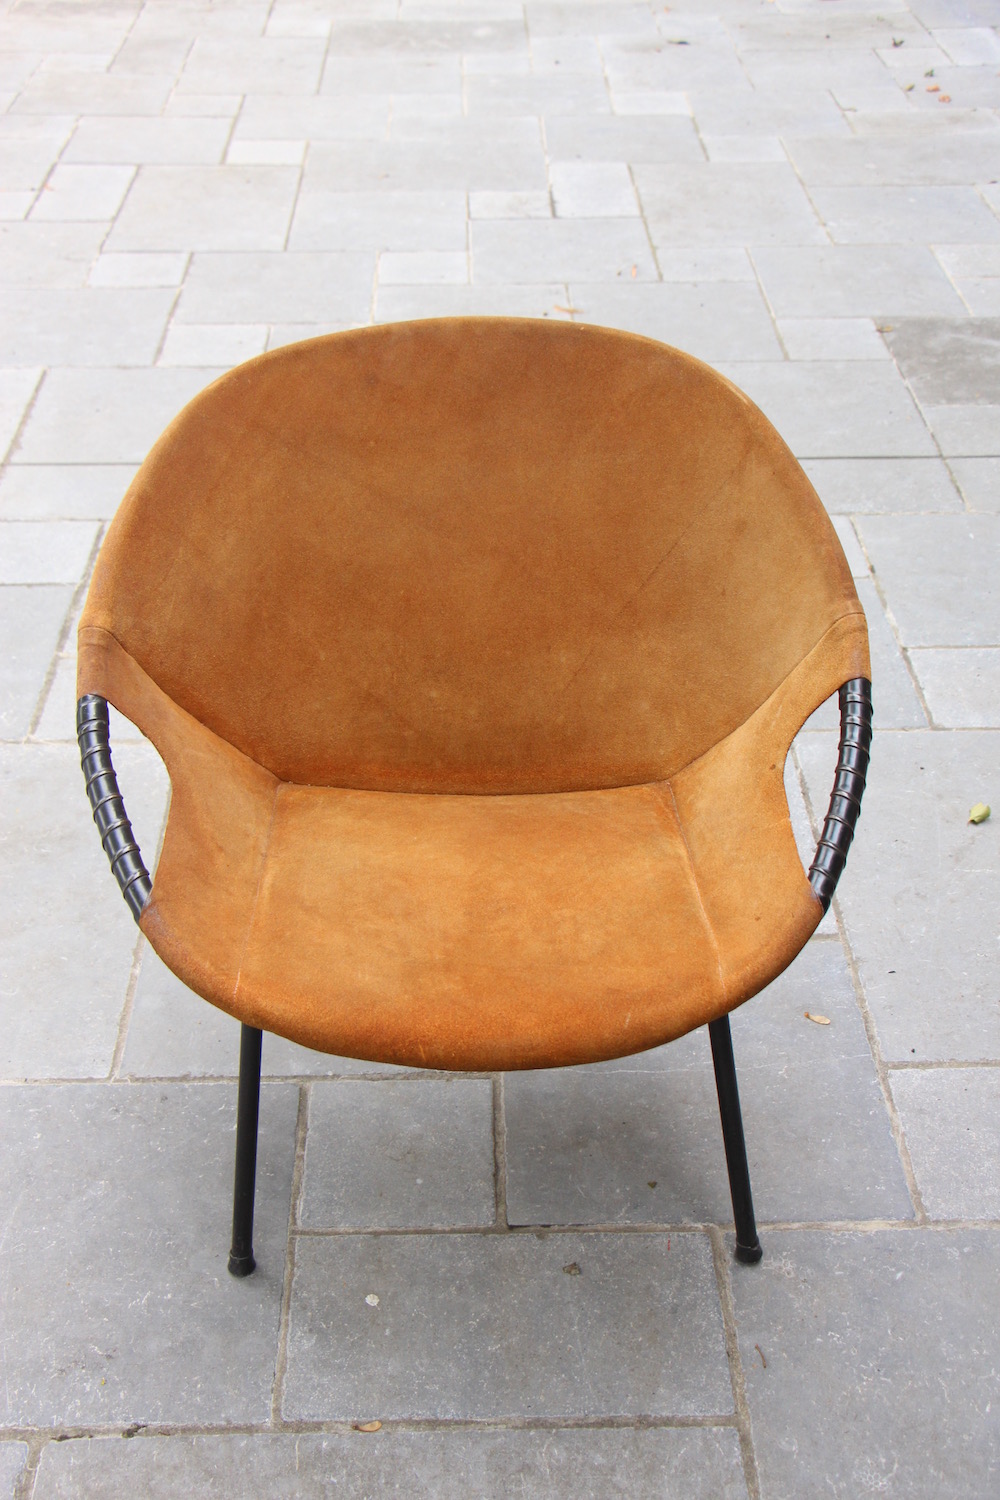 pair of suede round chairs, vintage